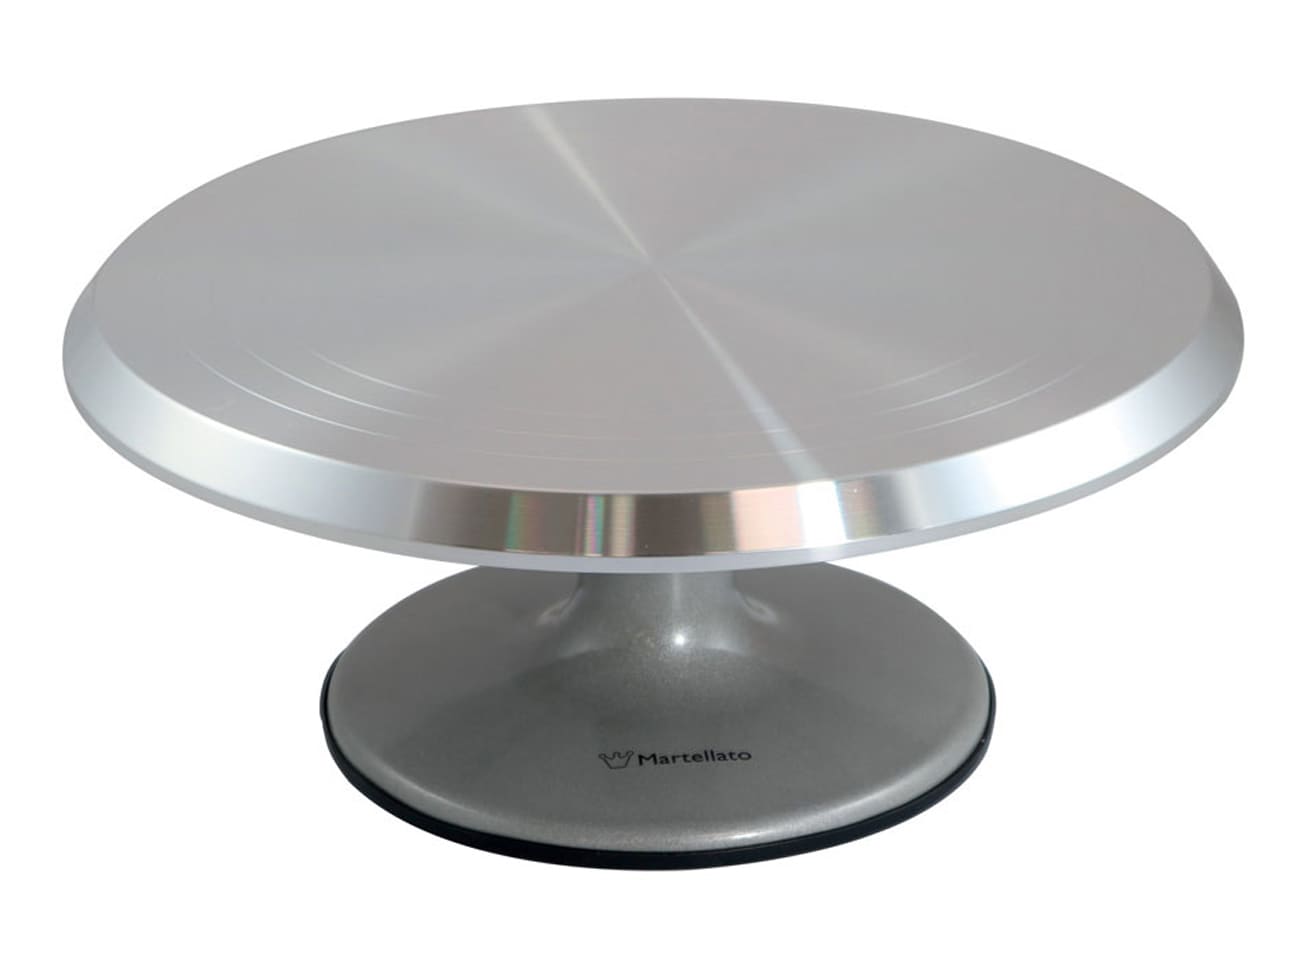 35cm Non-Slip Rotating Cake Decorating Turntable Display Stand - Silver |  Shop Today. Get it Tomorrow! | takealot.com